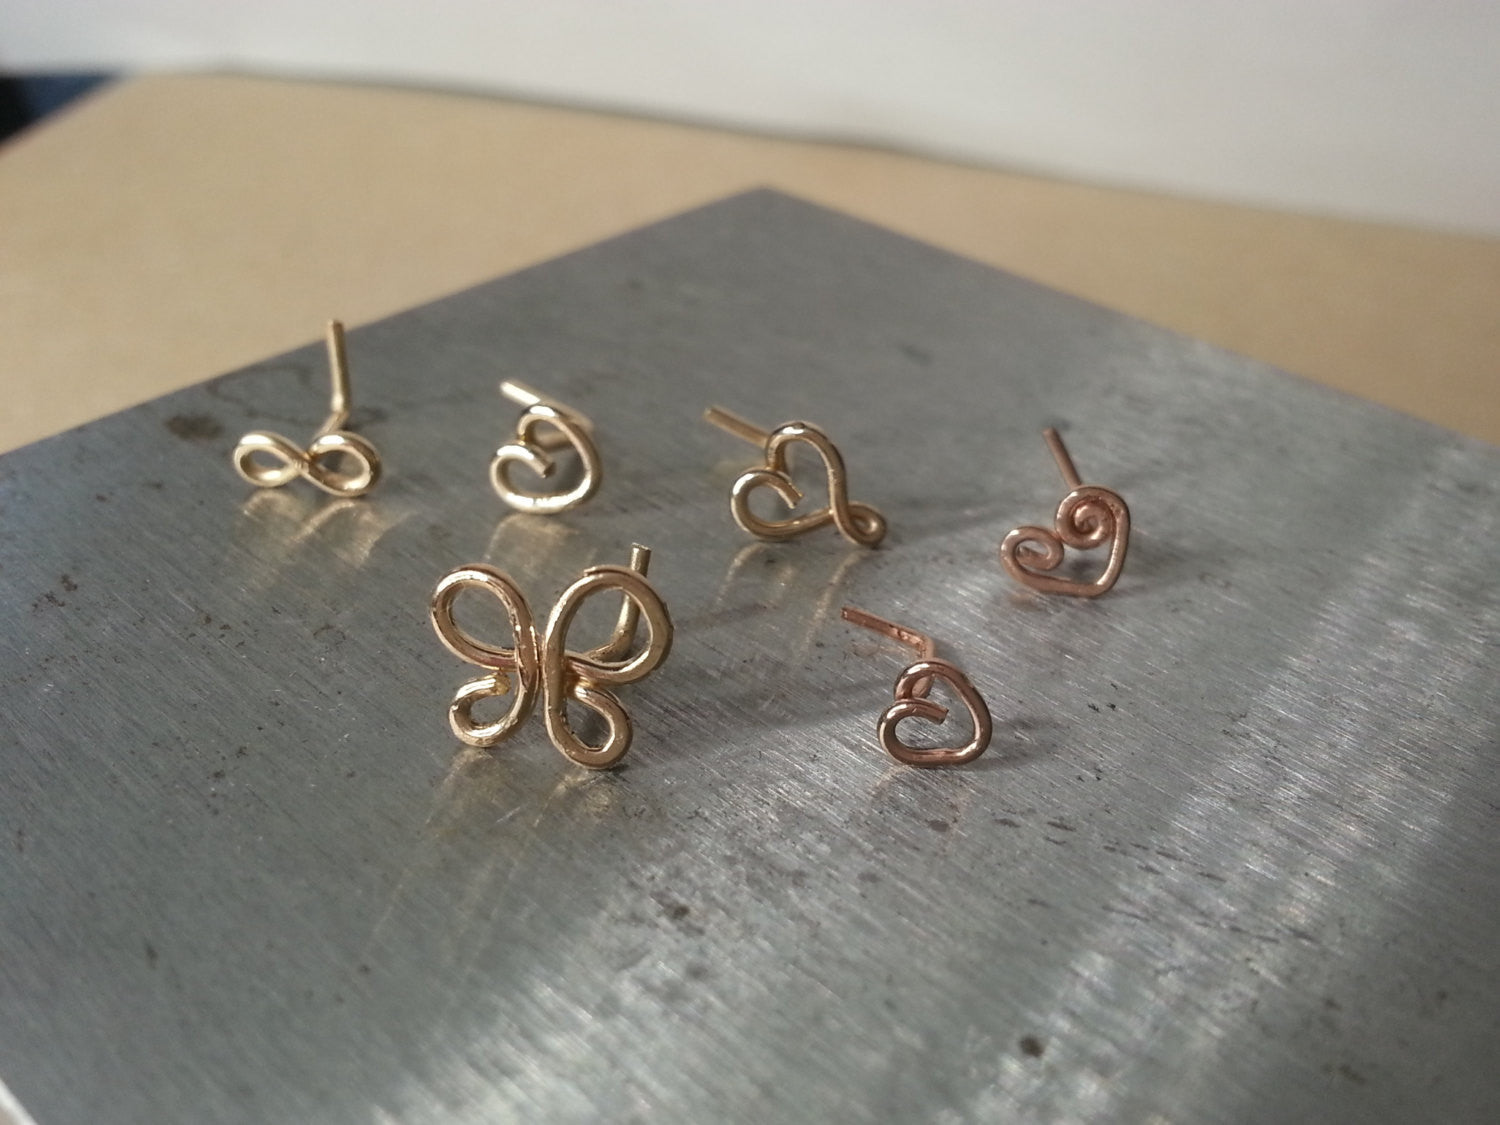 Nose Stud VARIETY VALENTINES Heart Cartilage 22, 24, 26ga 14k Yellow, White, Pink Rose Solid / Gold Filled / Silver Earring Helix Tragus